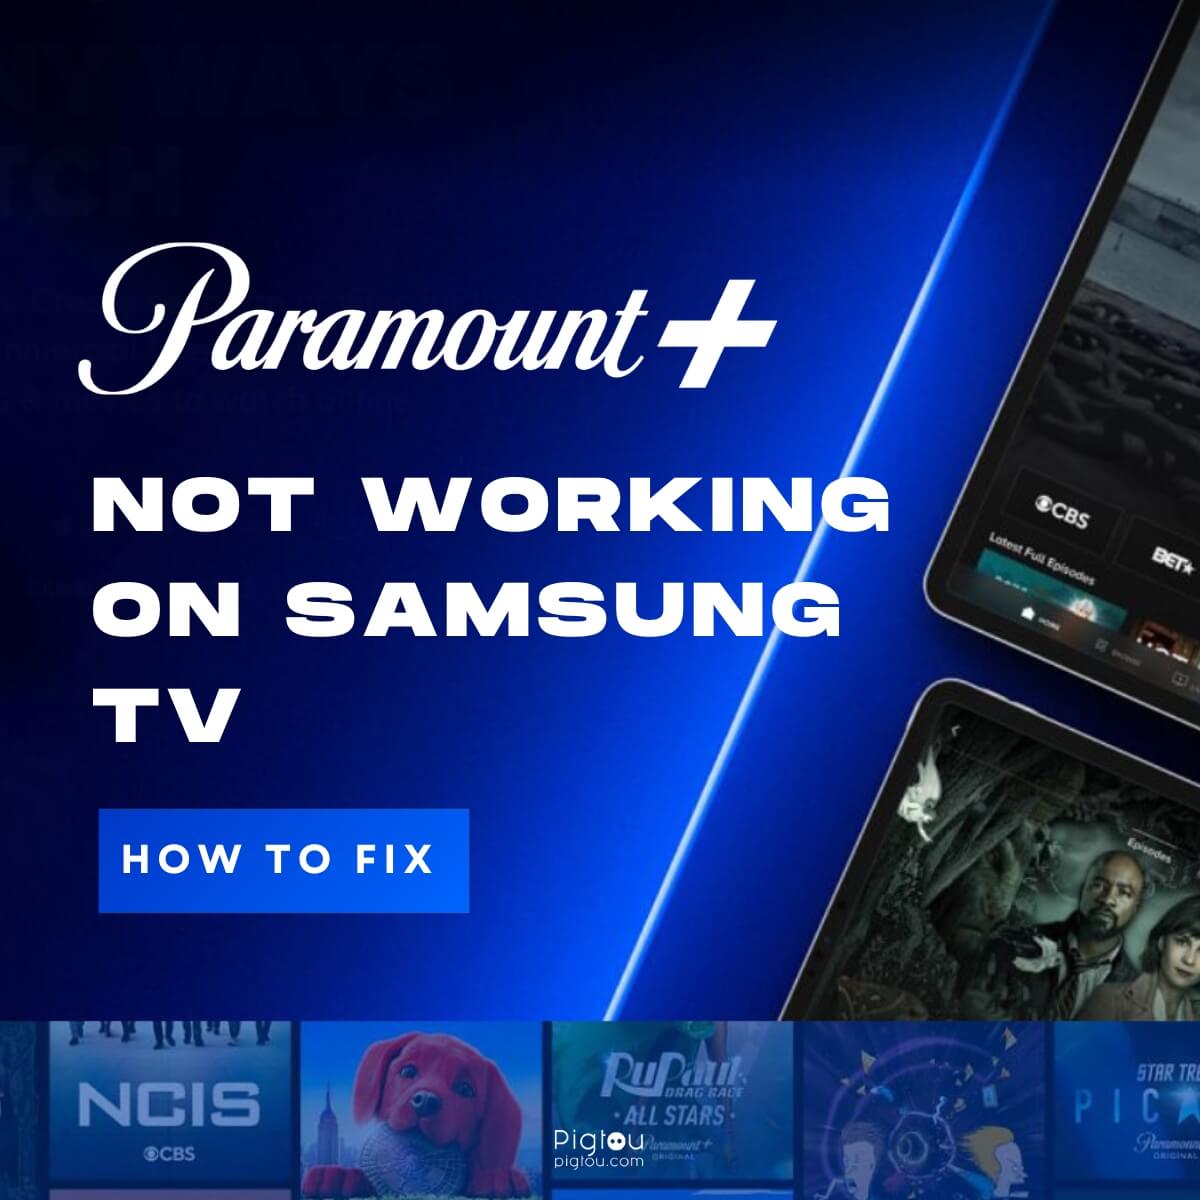 How to Fix 'Paramount Plus Not Working on Samsung TV'